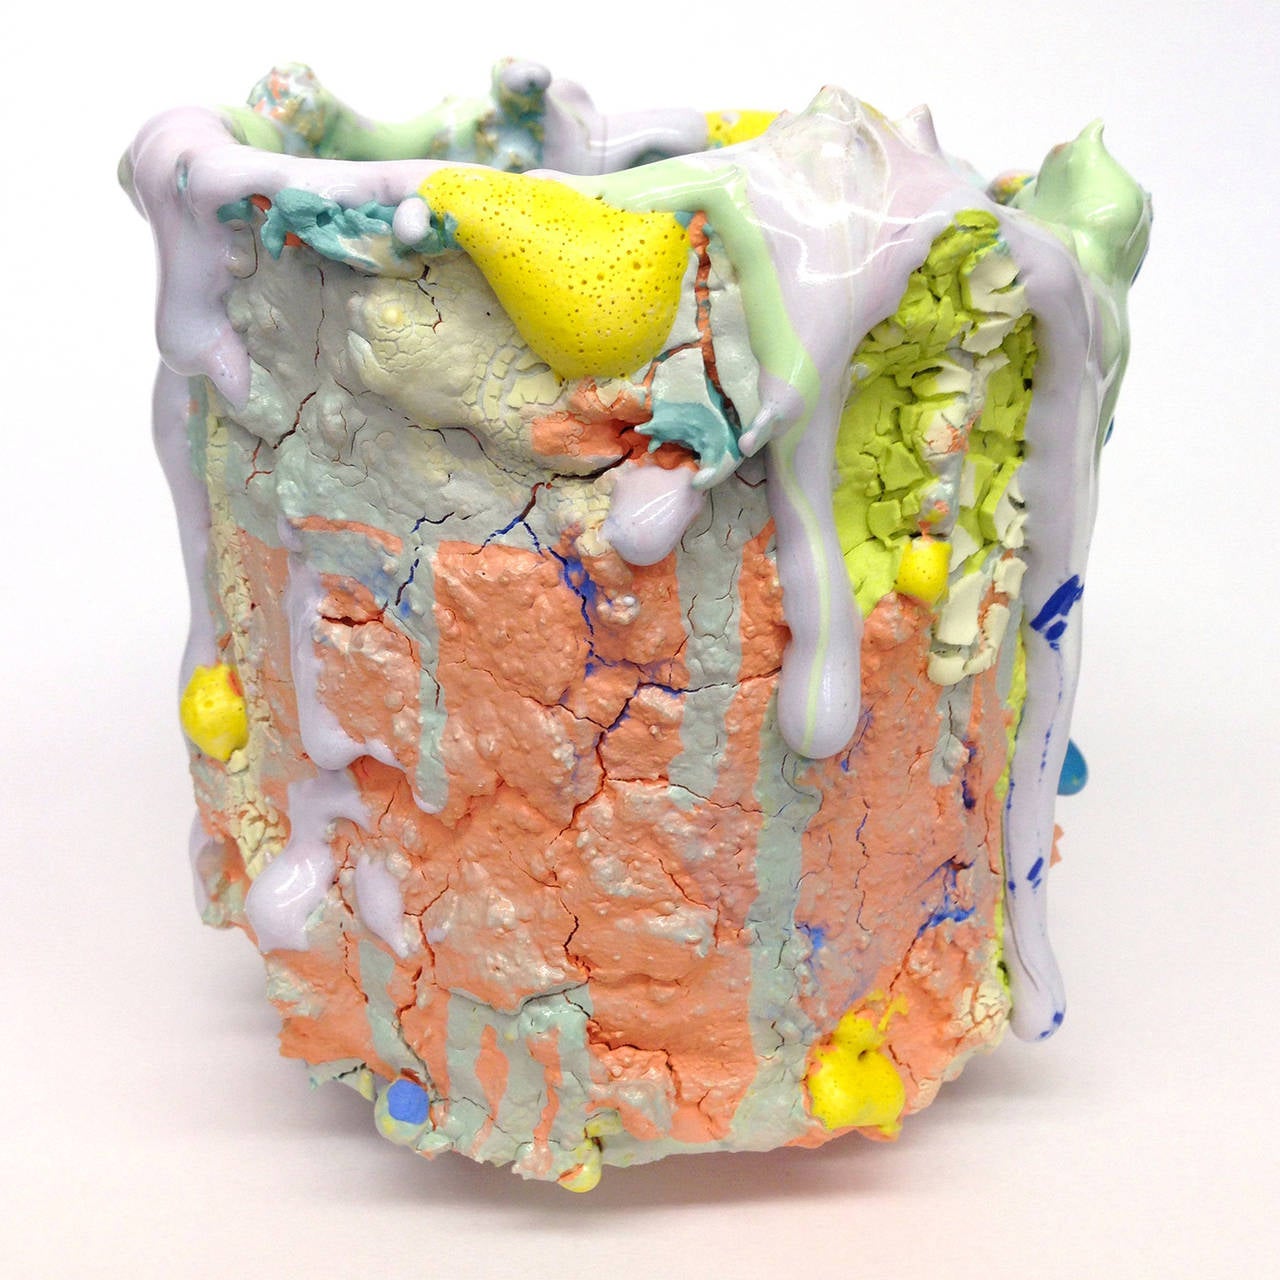 Contemporary ceramic vessel by LA based mixed media sculptor Brian Rochefort for Kelly Behun Studio. Highly textured and worked surface resulting from multiple firings. Multicolored glazes. Watertight, may be used as a vase.